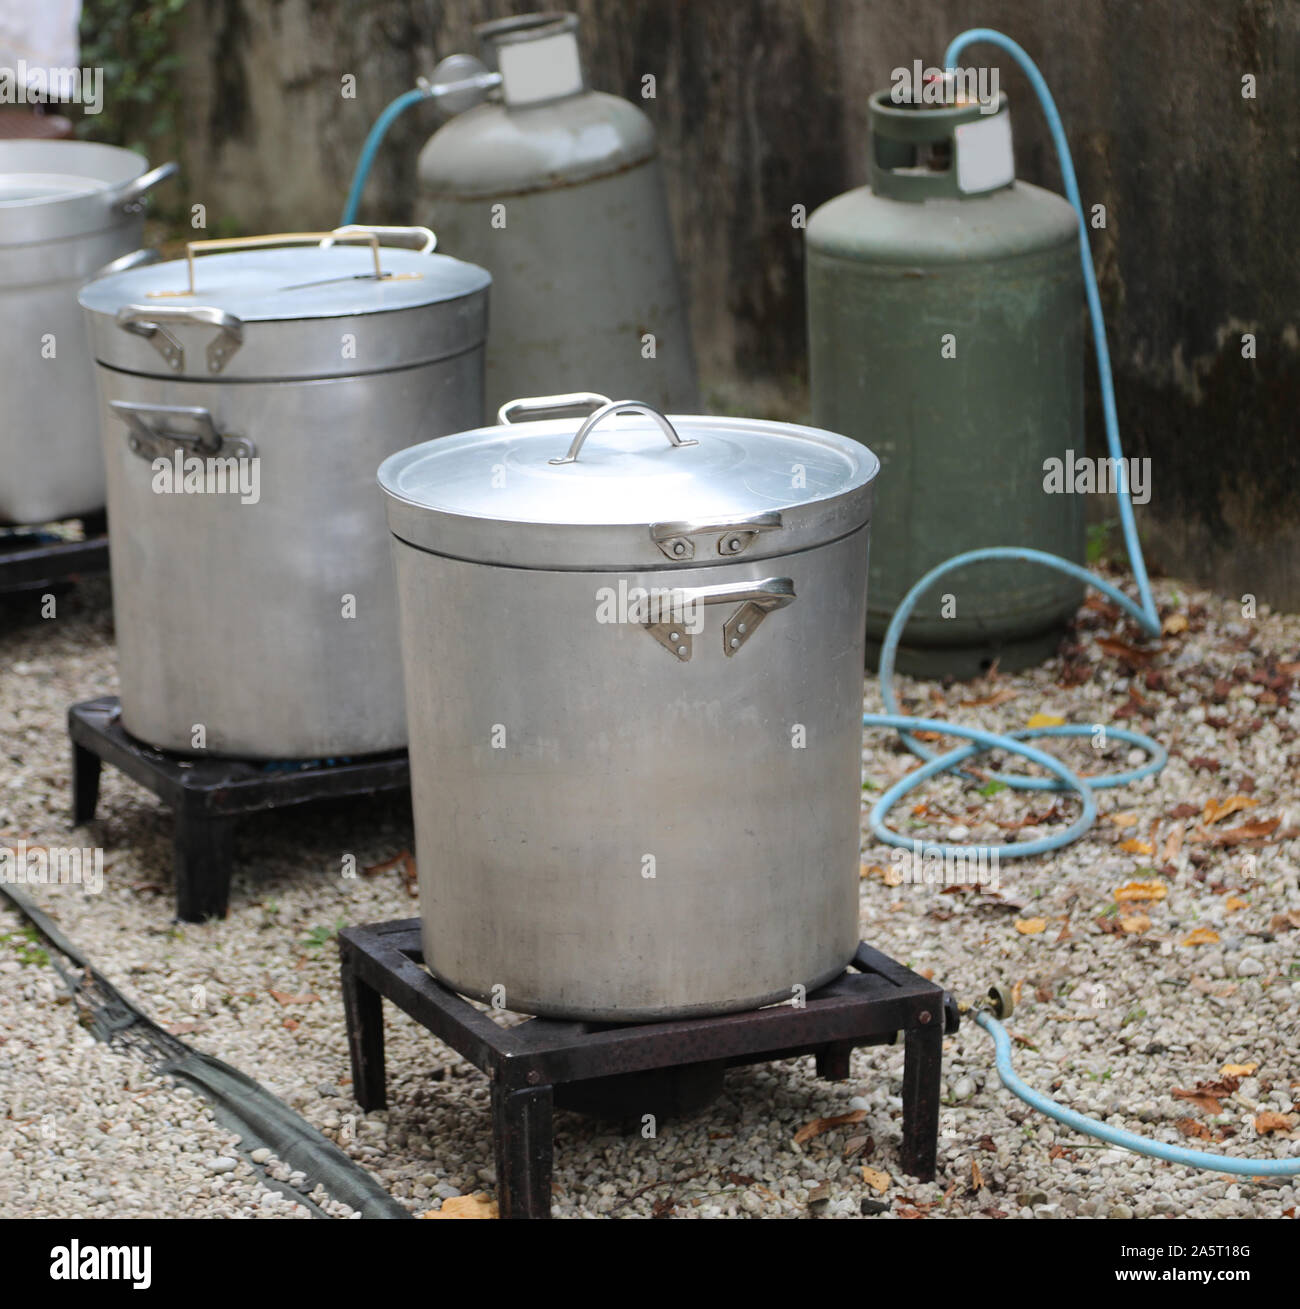 https://c8.alamy.com/comp/2A5T18G/outdoor-kitchen-with-many-big-cauldrons-without-people-and-with-gas-tanks-2A5T18G.jpg